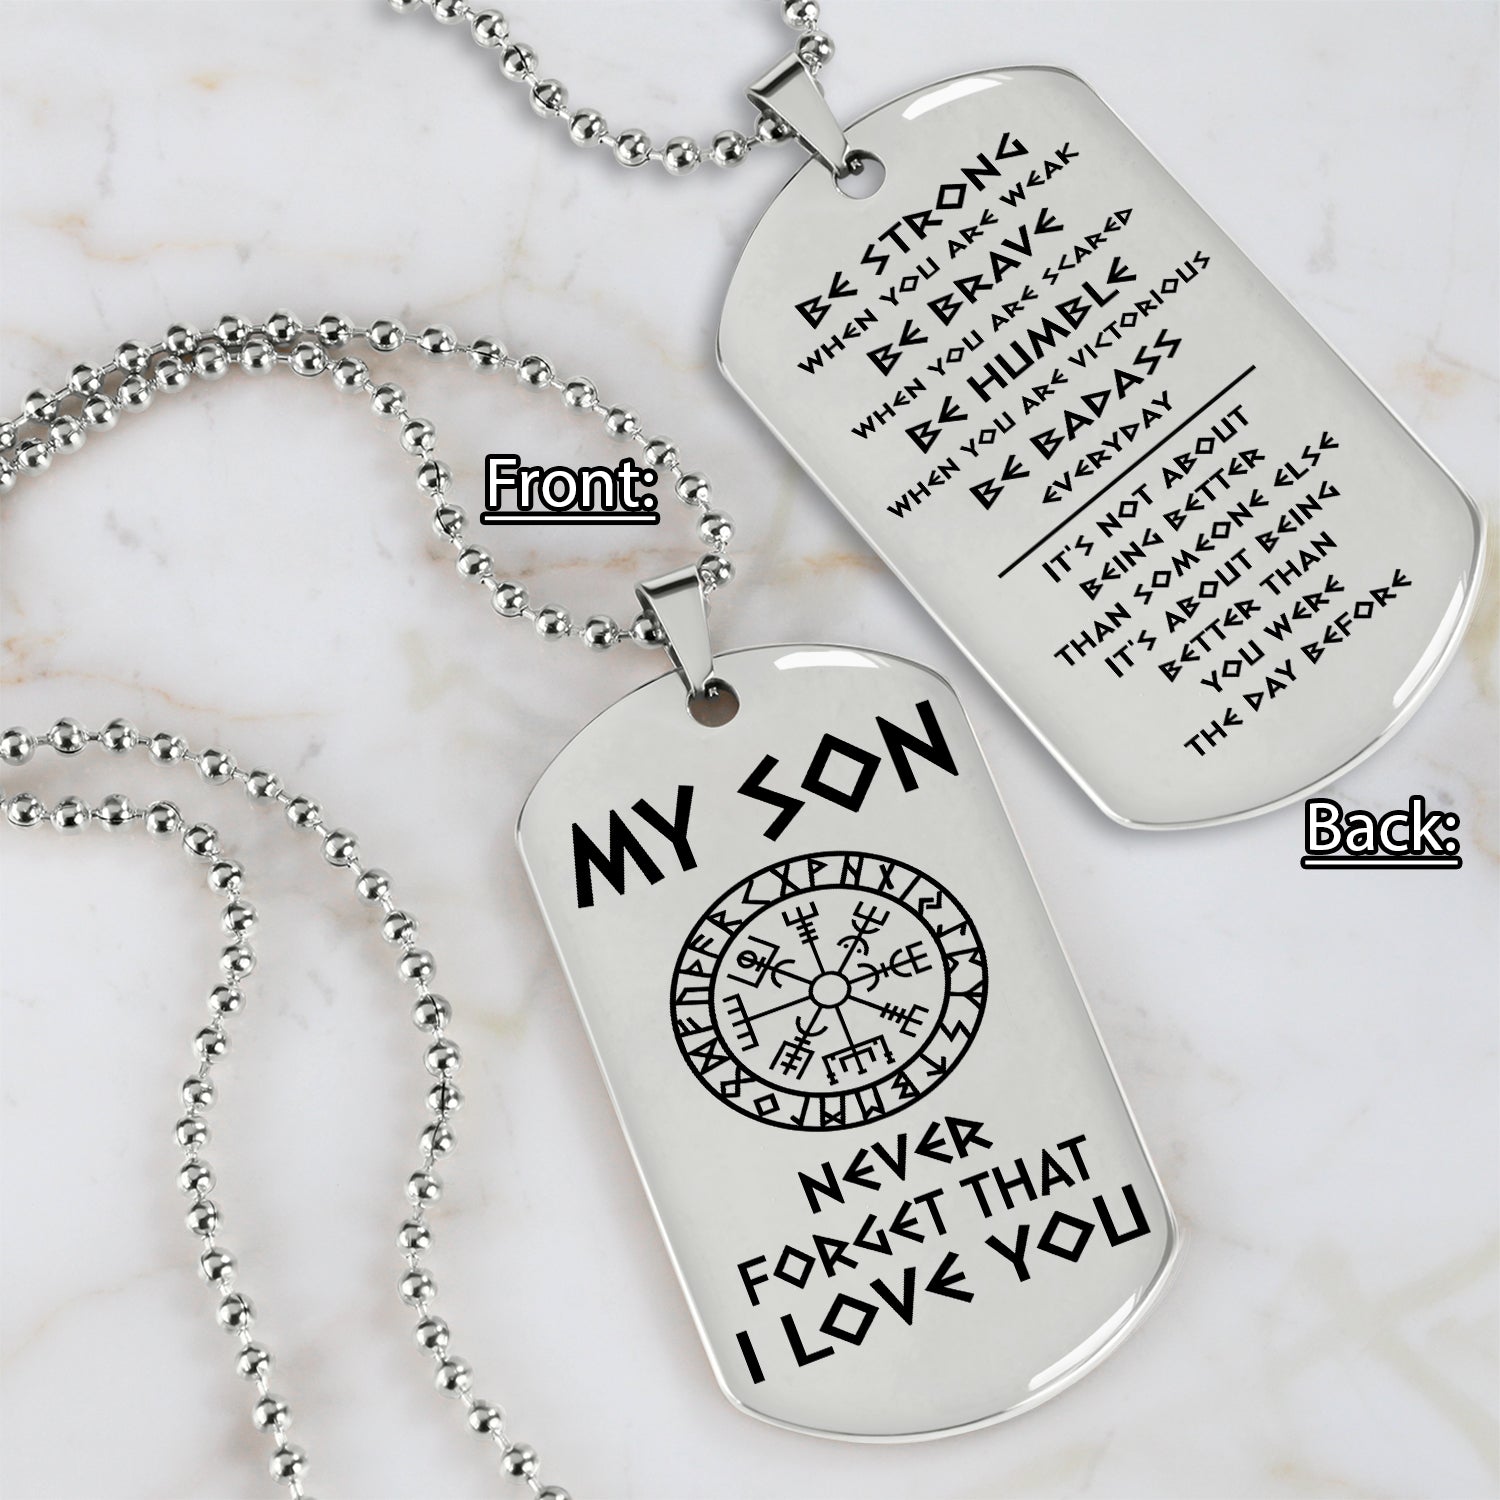 Vikings engraved double sided dog tag bracelet grandpa to grandson Be strong be brave be humble